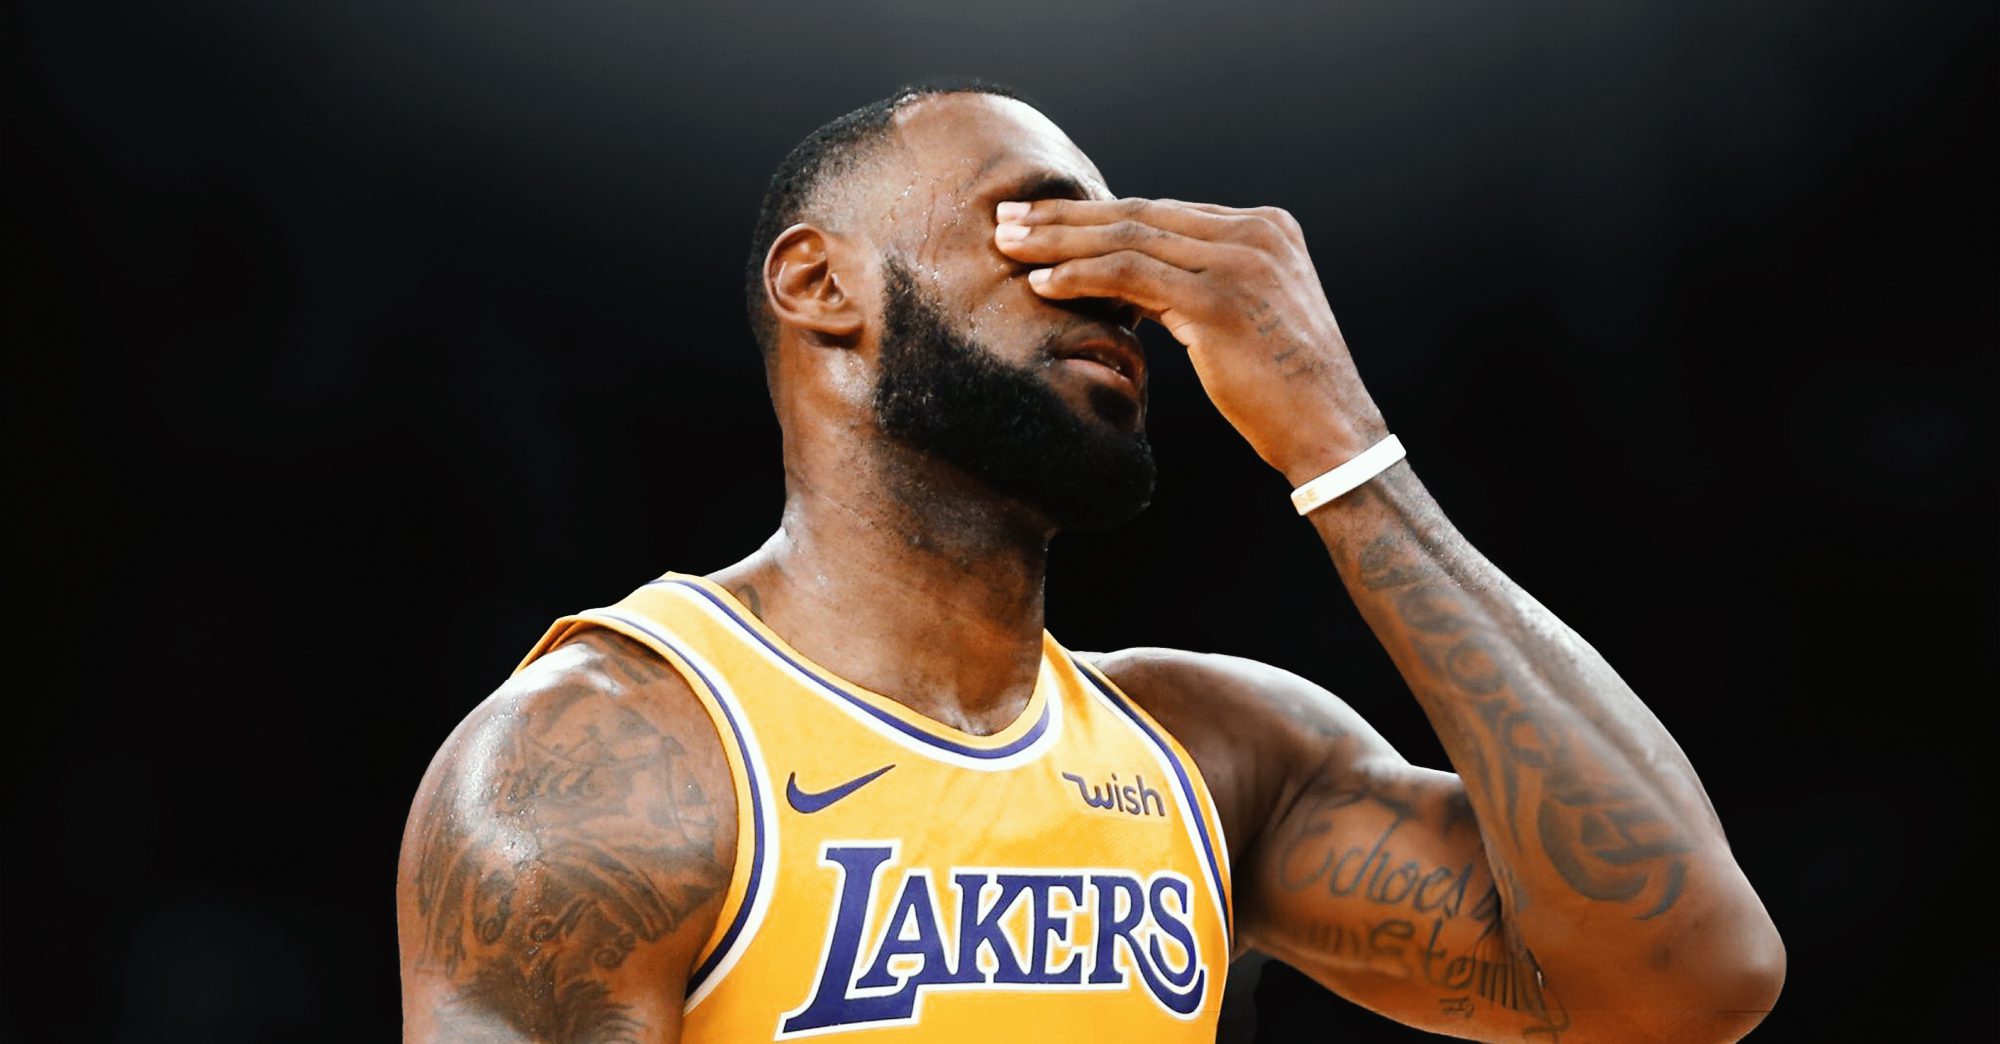 LeBron James Upset With Referees Over Free Throw Disparity